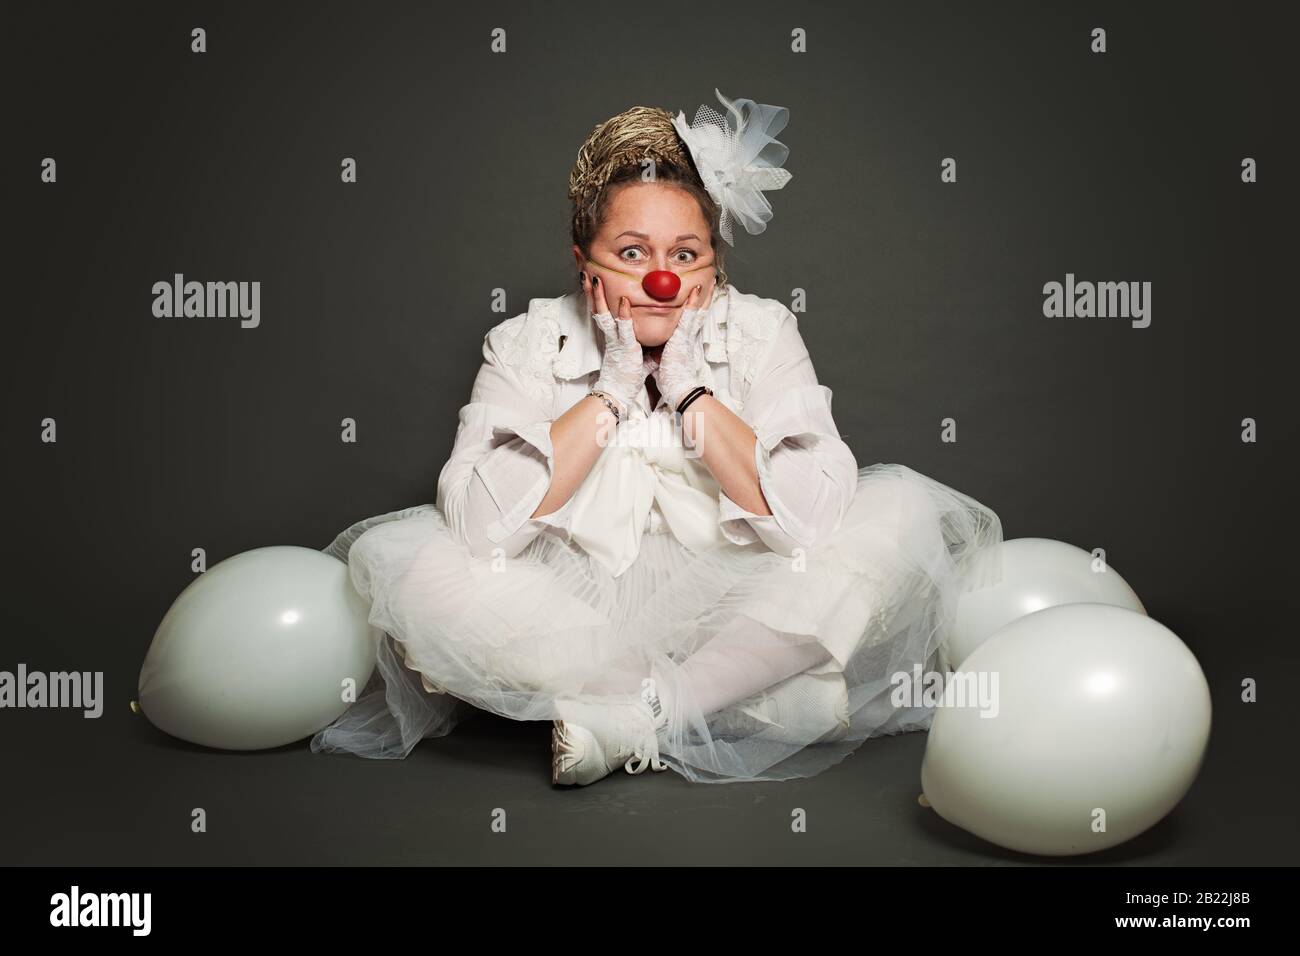 Woman clown on gray background, studio portrait. Performance Actress, White Clown Character Stock Photo